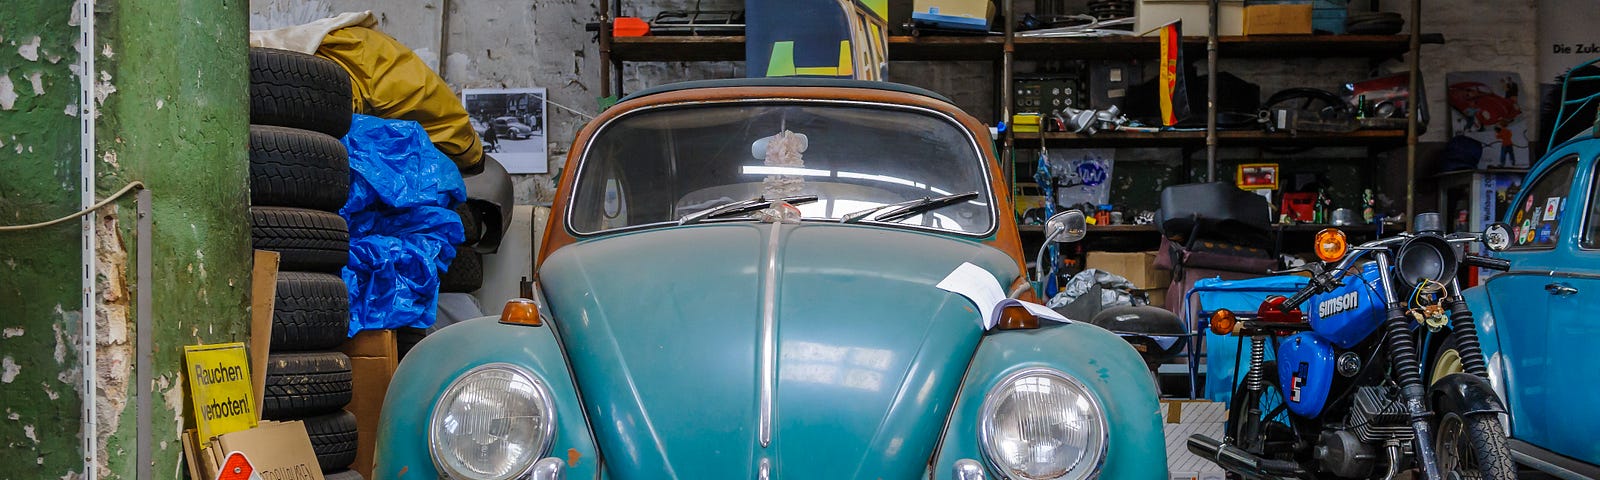 An antique car in a garage packed full of stuff. Swedish death cleaning